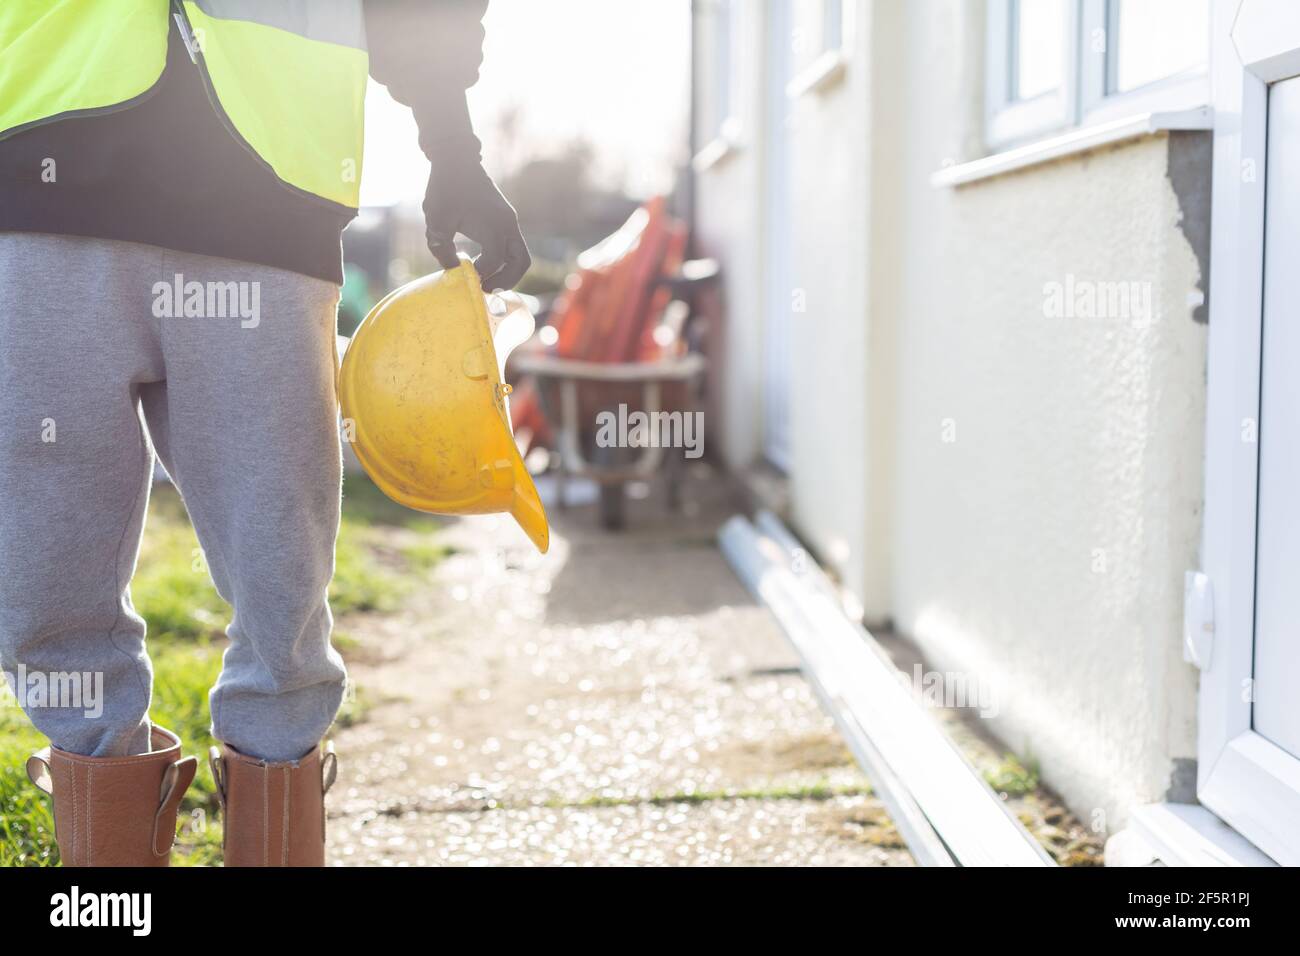 A close-up of an unknown builder wearing a high visibility vest and holding a hard hat. Builder, safety, building site, laborer concept Stock Photo